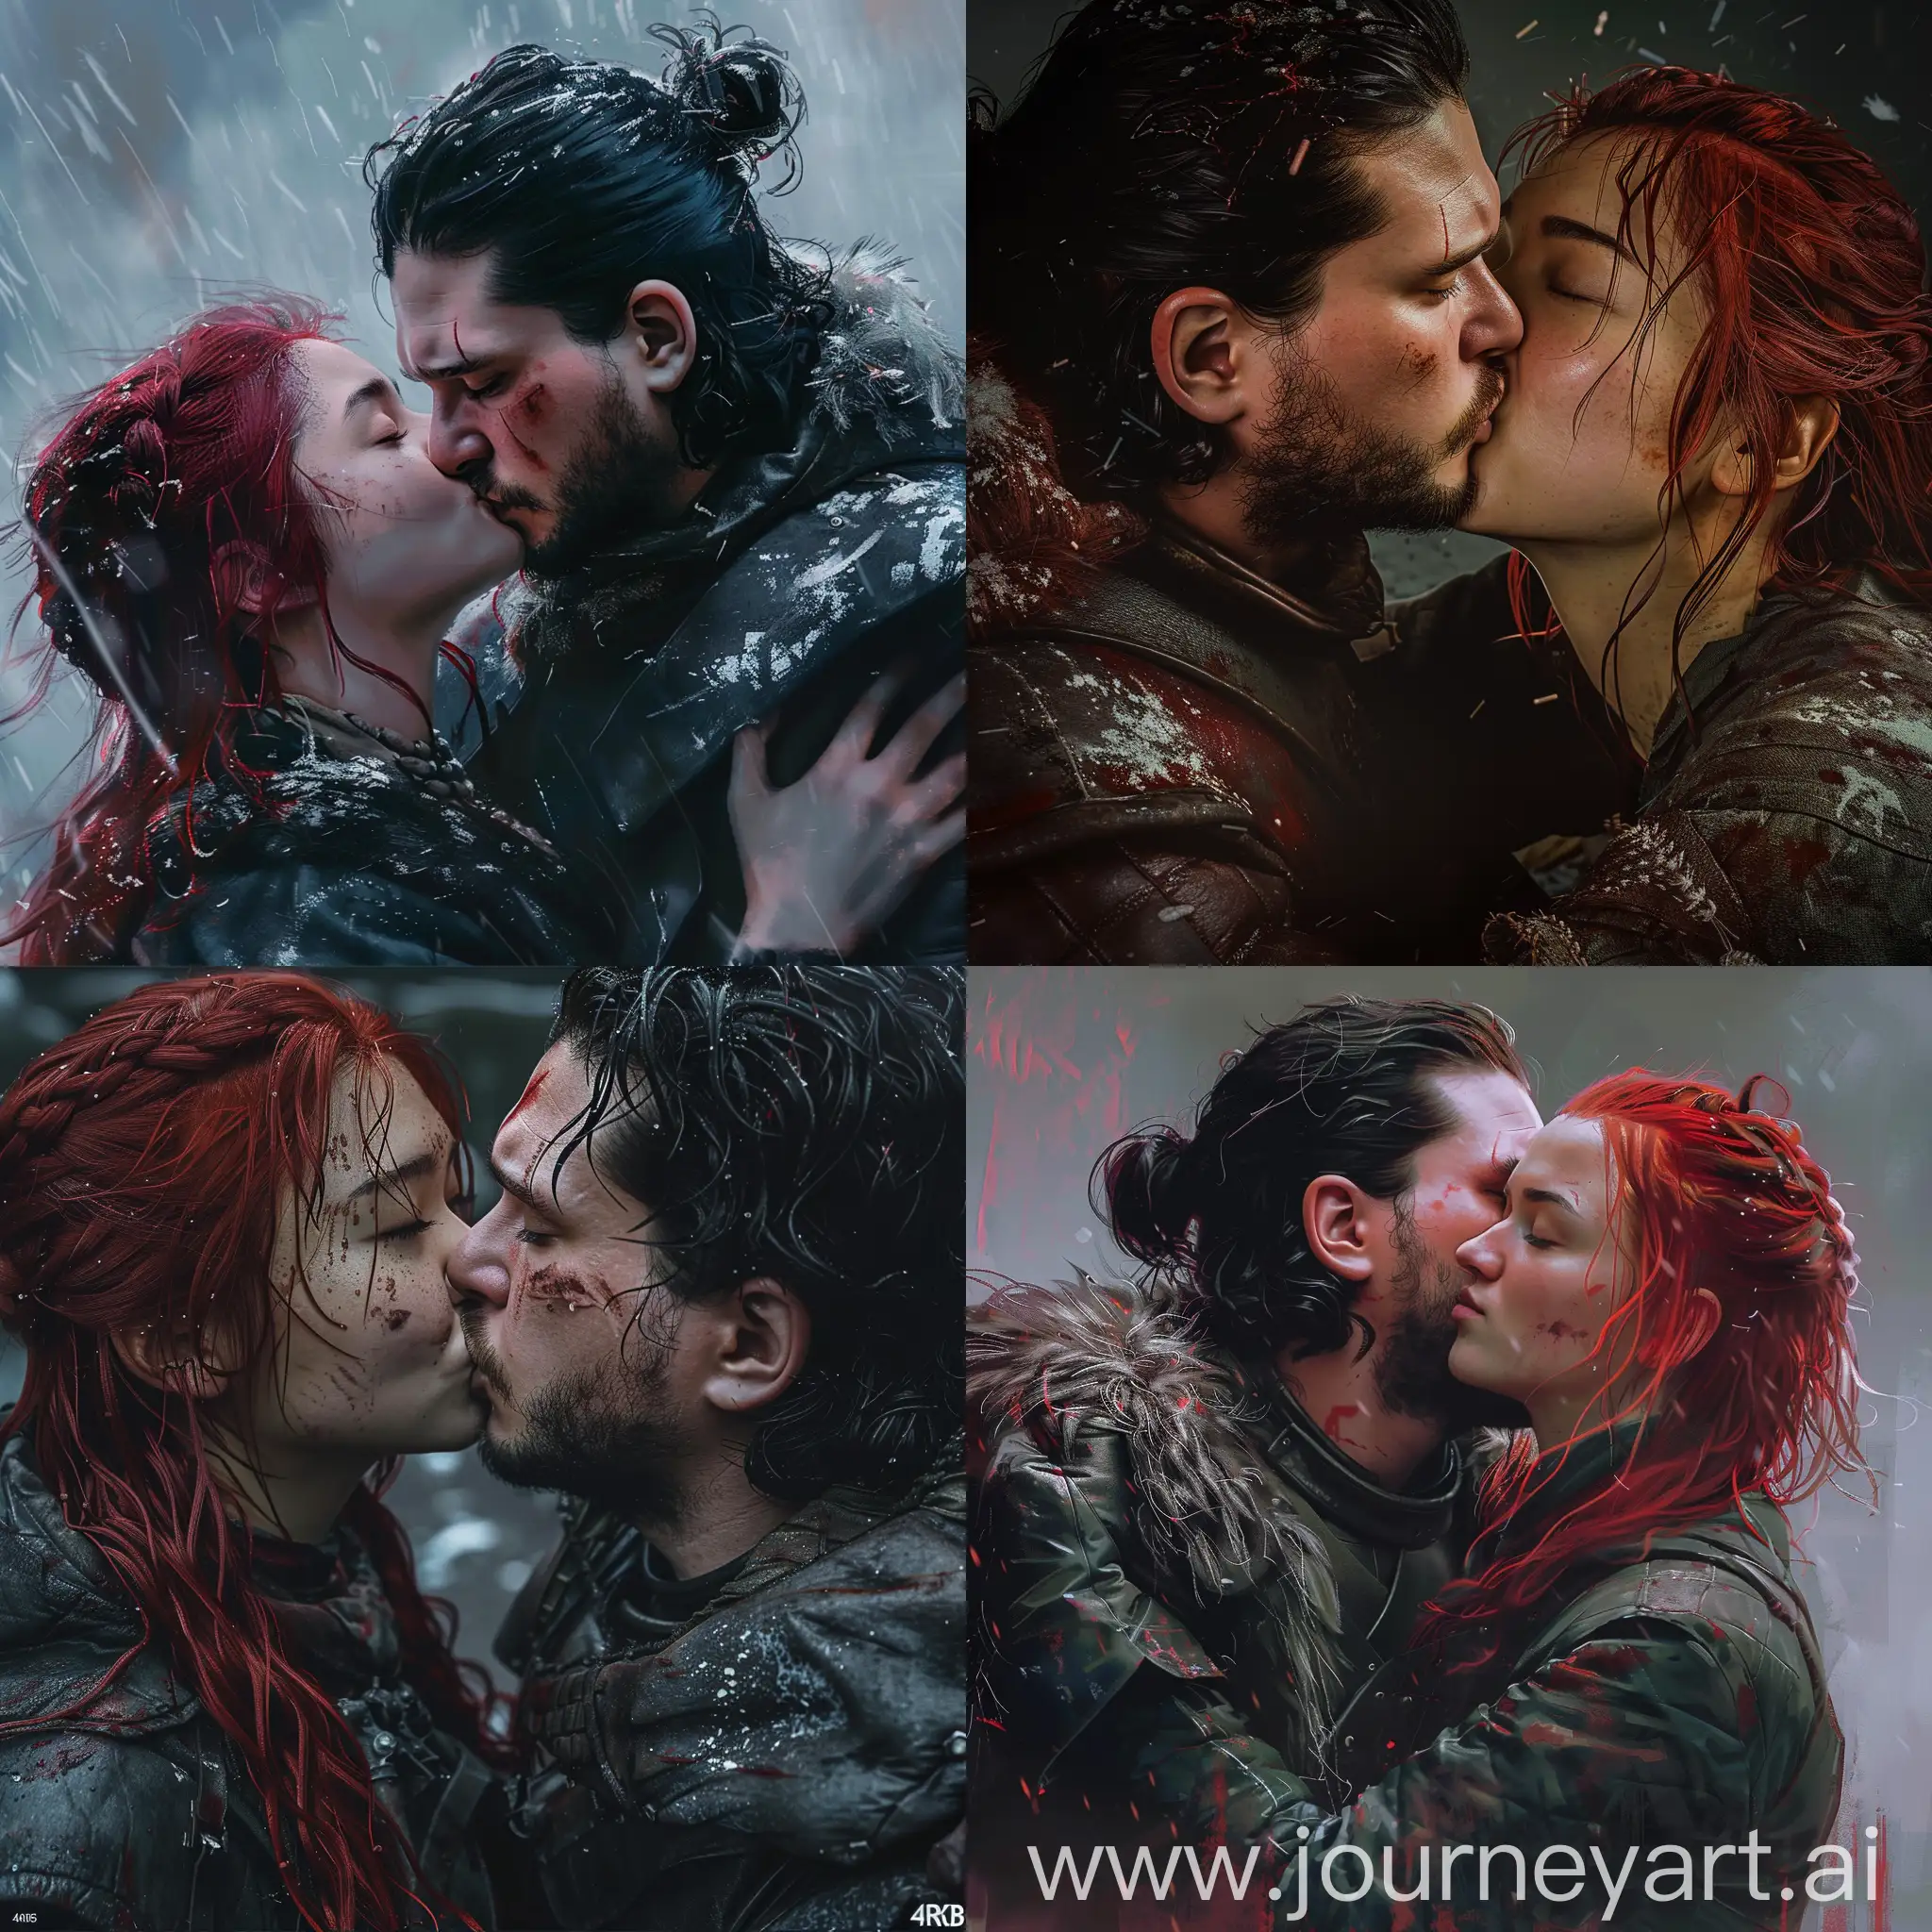 Jon-Snow-Kisses-RedHaired-Asian-Girl-in-PostApocalyptic-The-Last-of-Us-Style-Scene